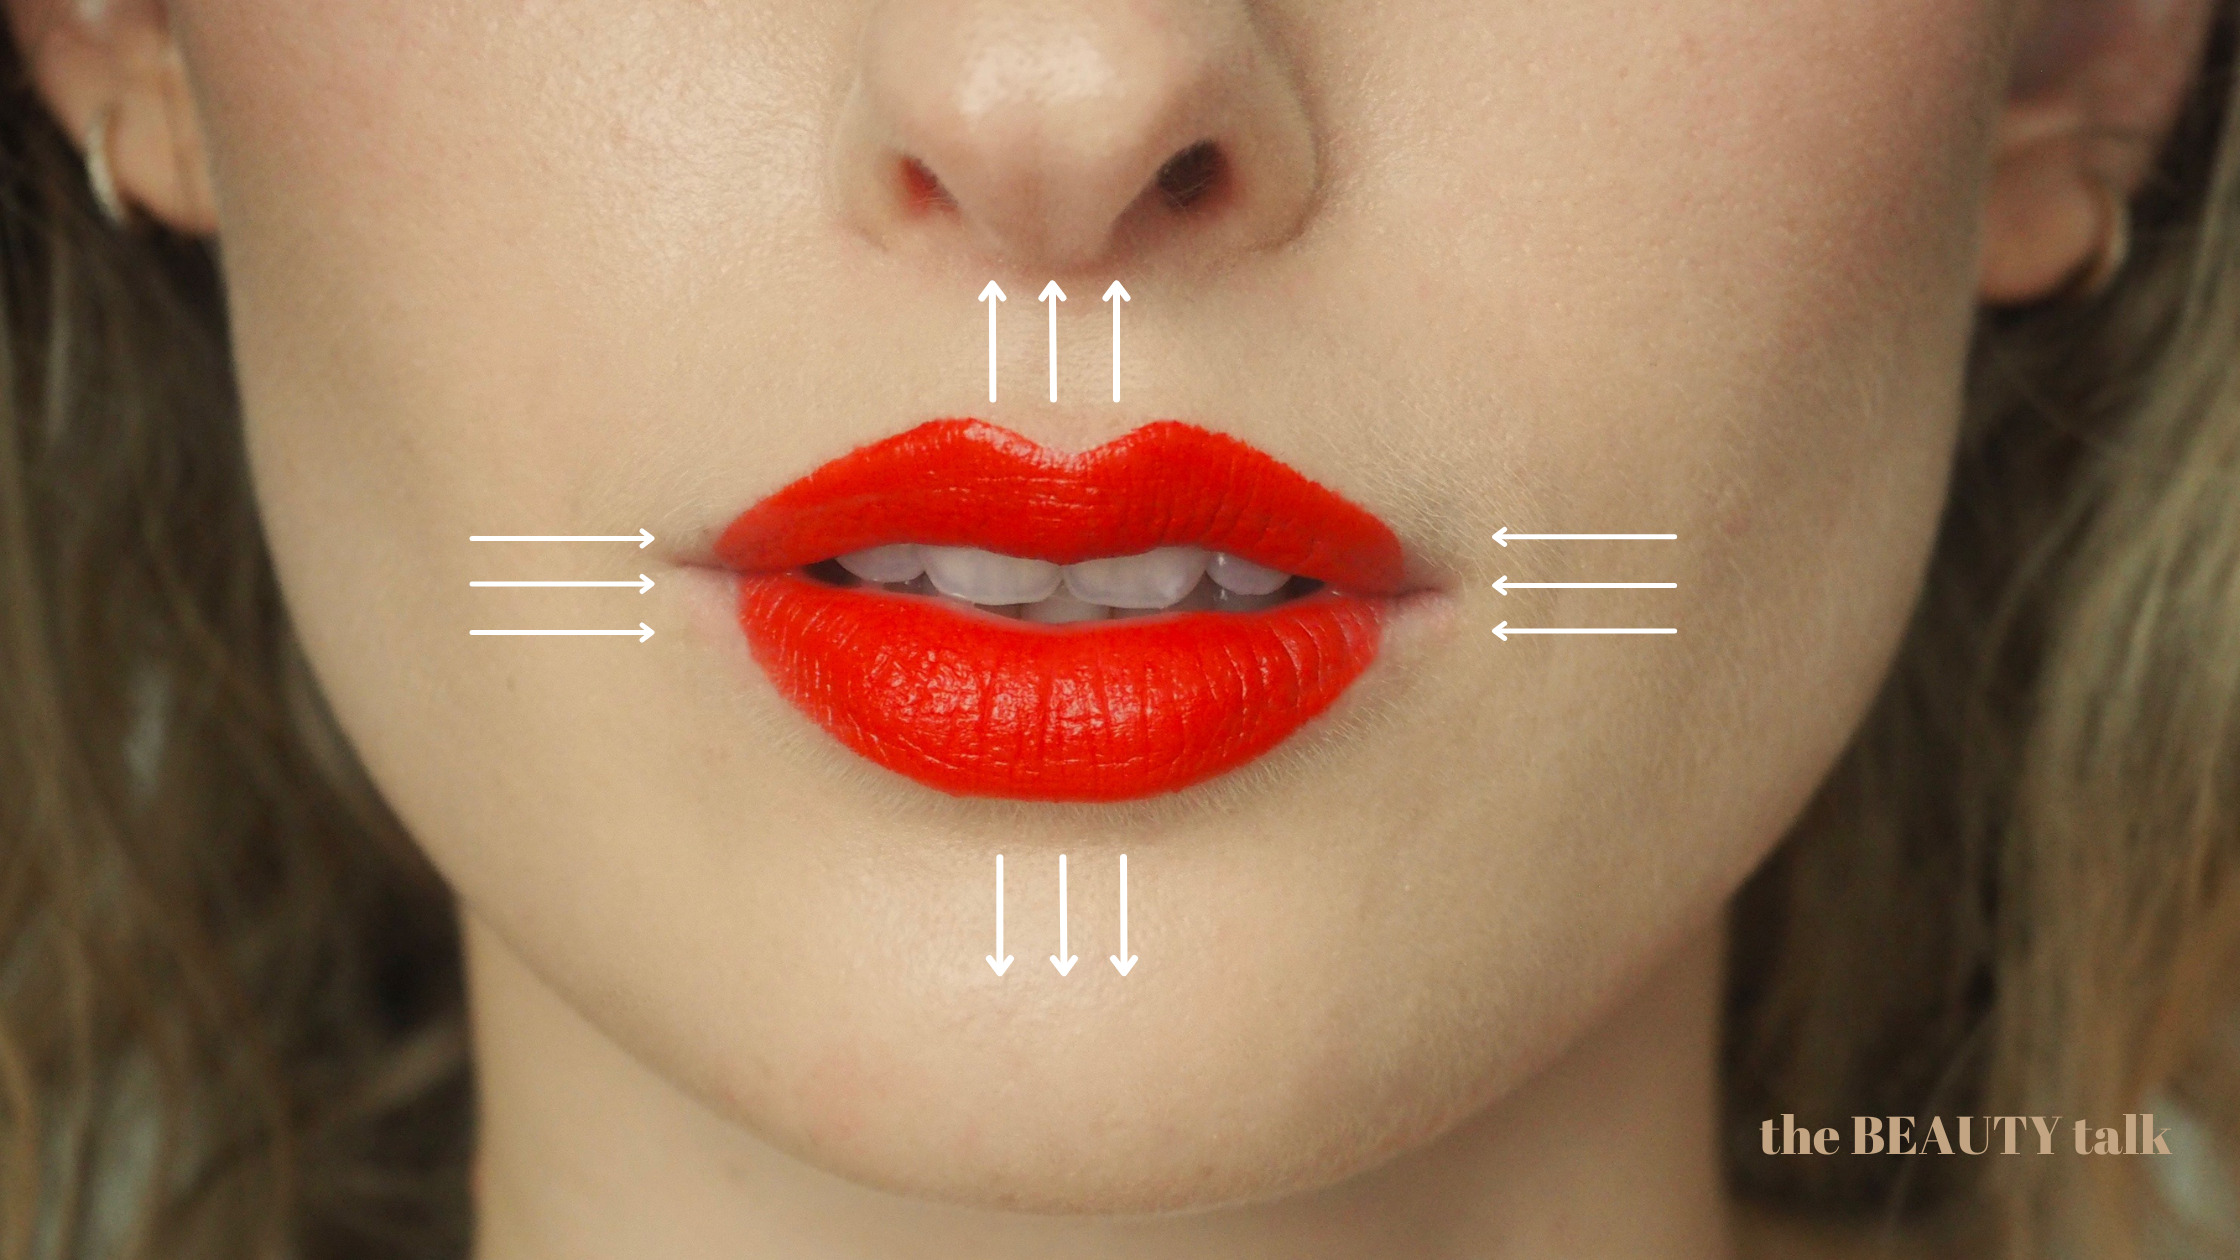 How to apply lipstick to make lips look bigger